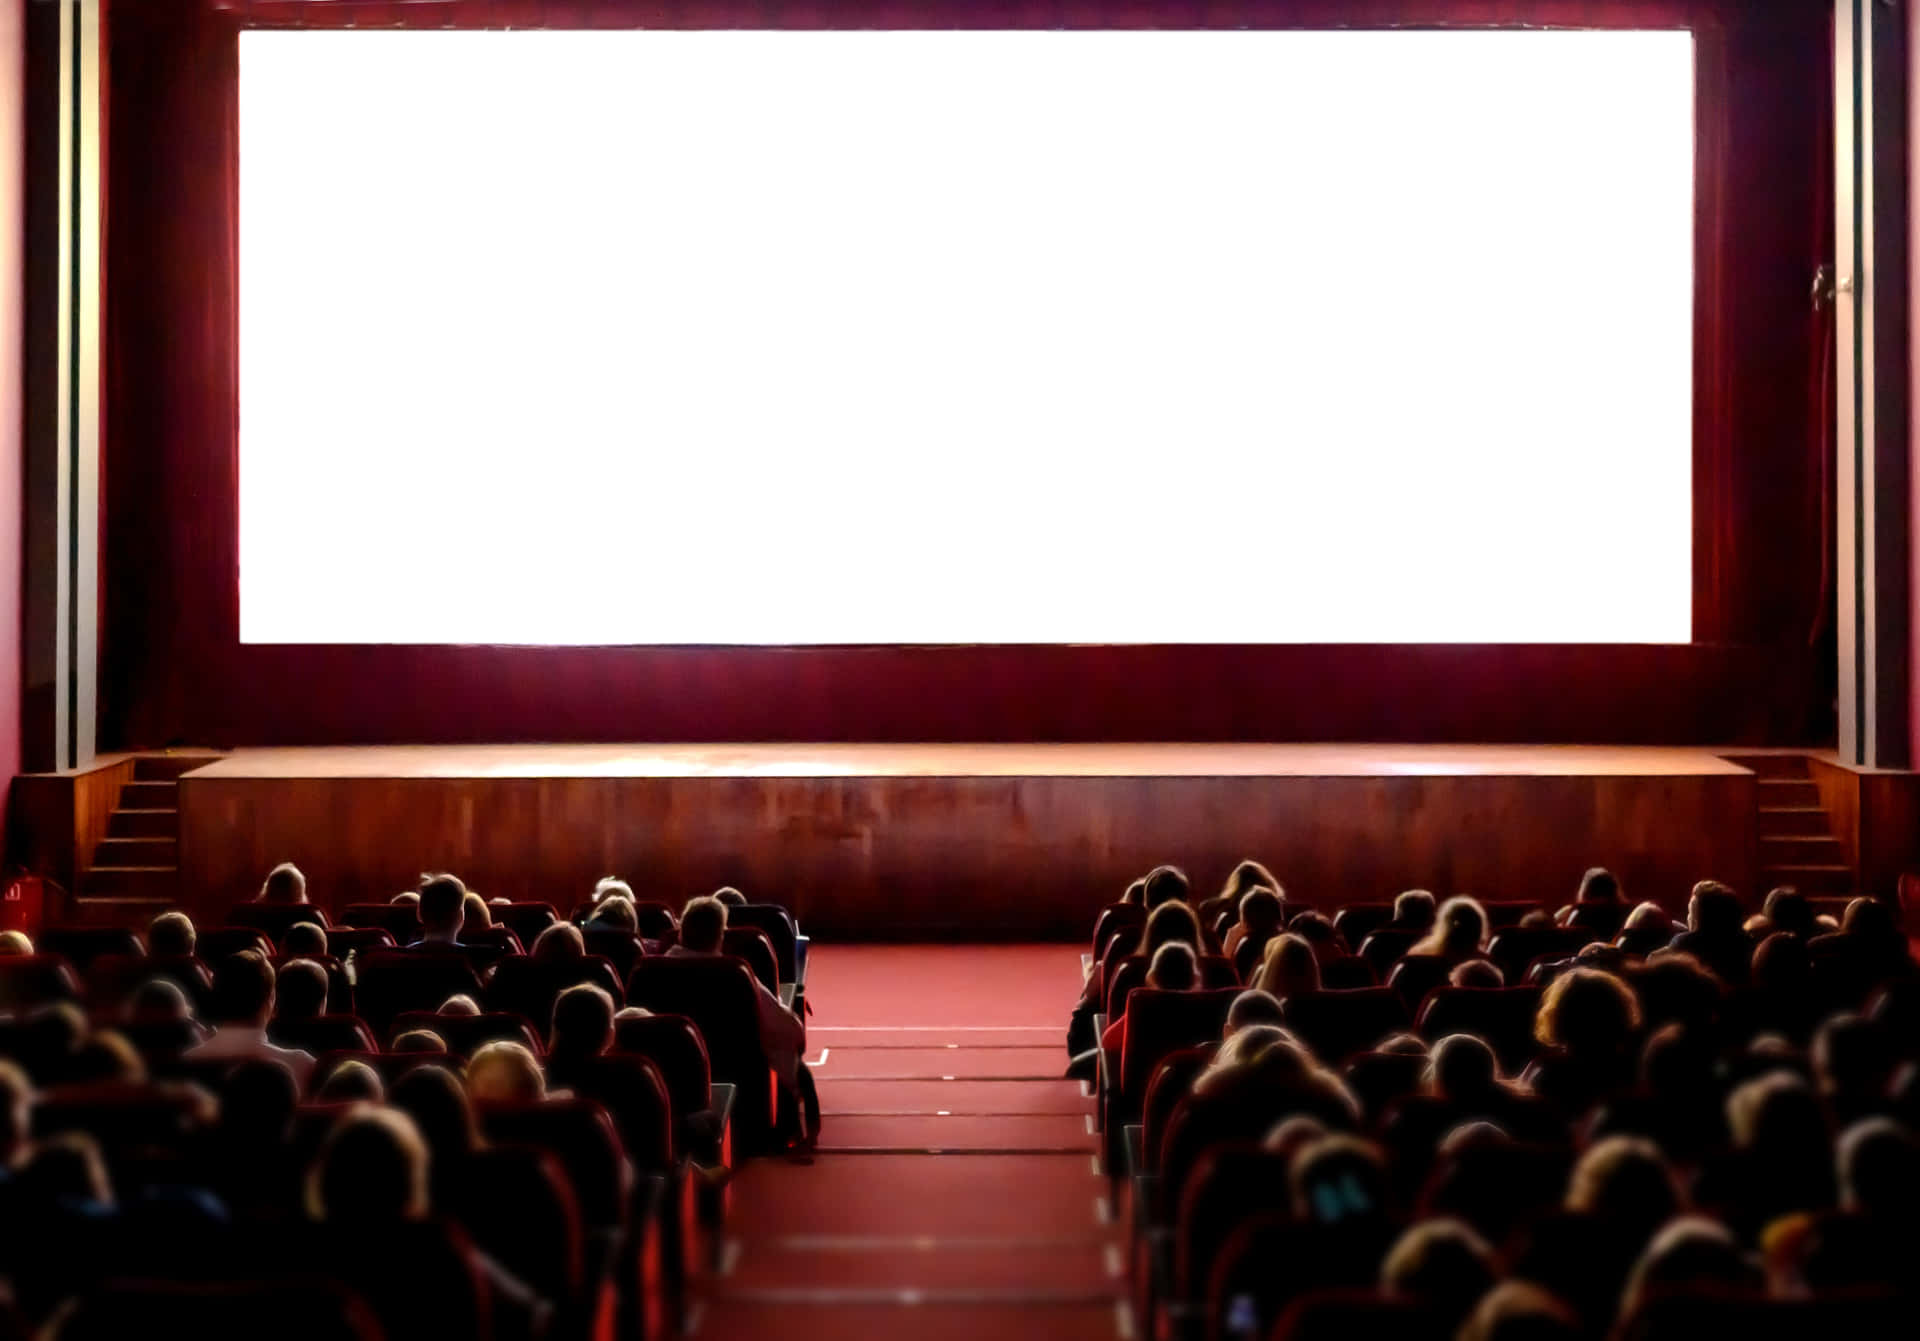 A Large Screen In A Theater With People Watching Wallpaper